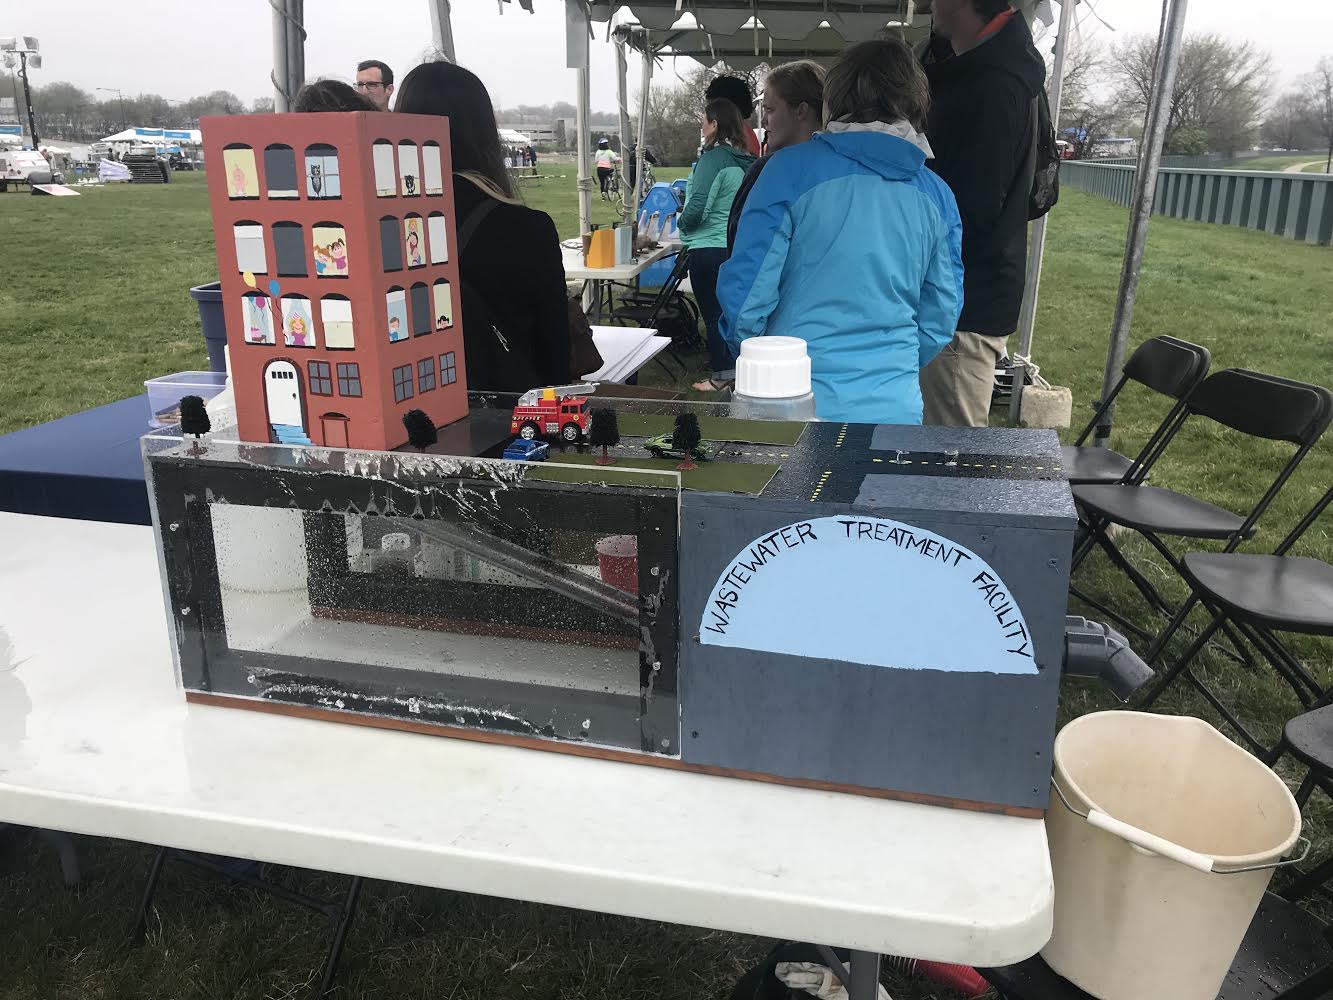 At the 4th annual Anacostia River festival, I used a wastewater treatment plant model to explain the goal of the Tunnel project to local citizens. Photo credit: Samantha Gleich